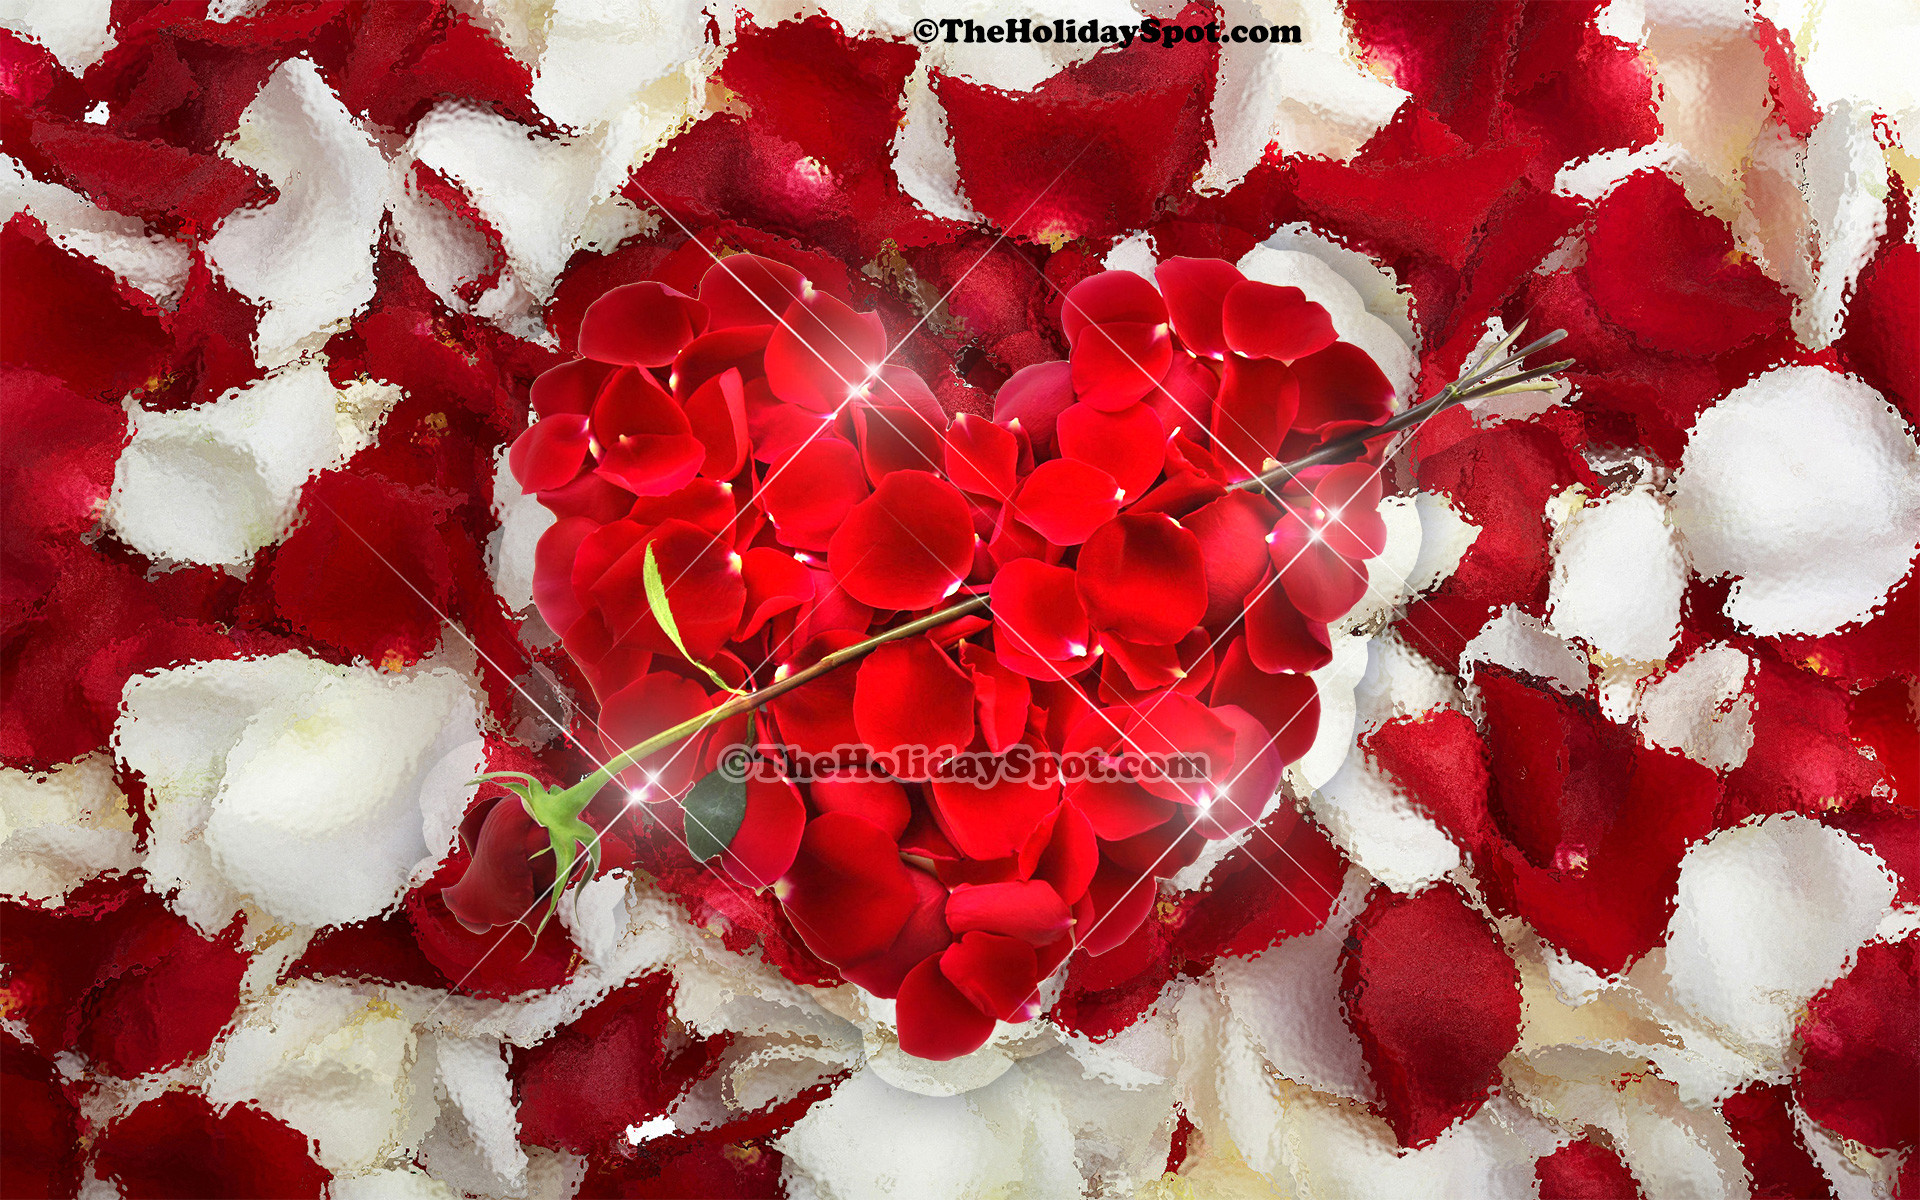 Valentines Day background themed on love showing a heart made of rose petals